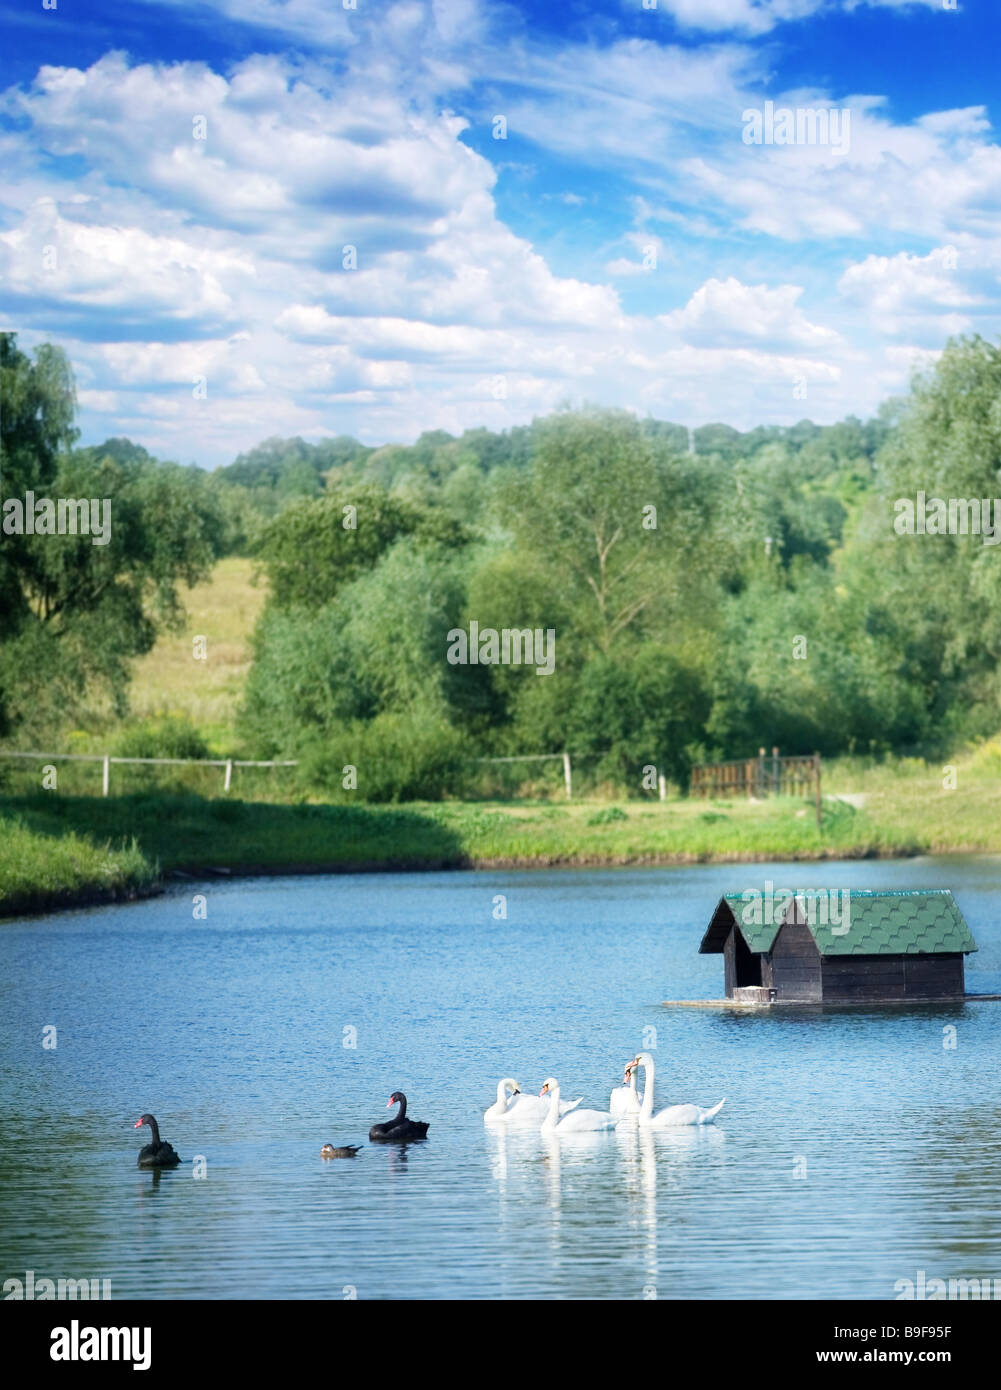 Swans on a lake Stock Photo